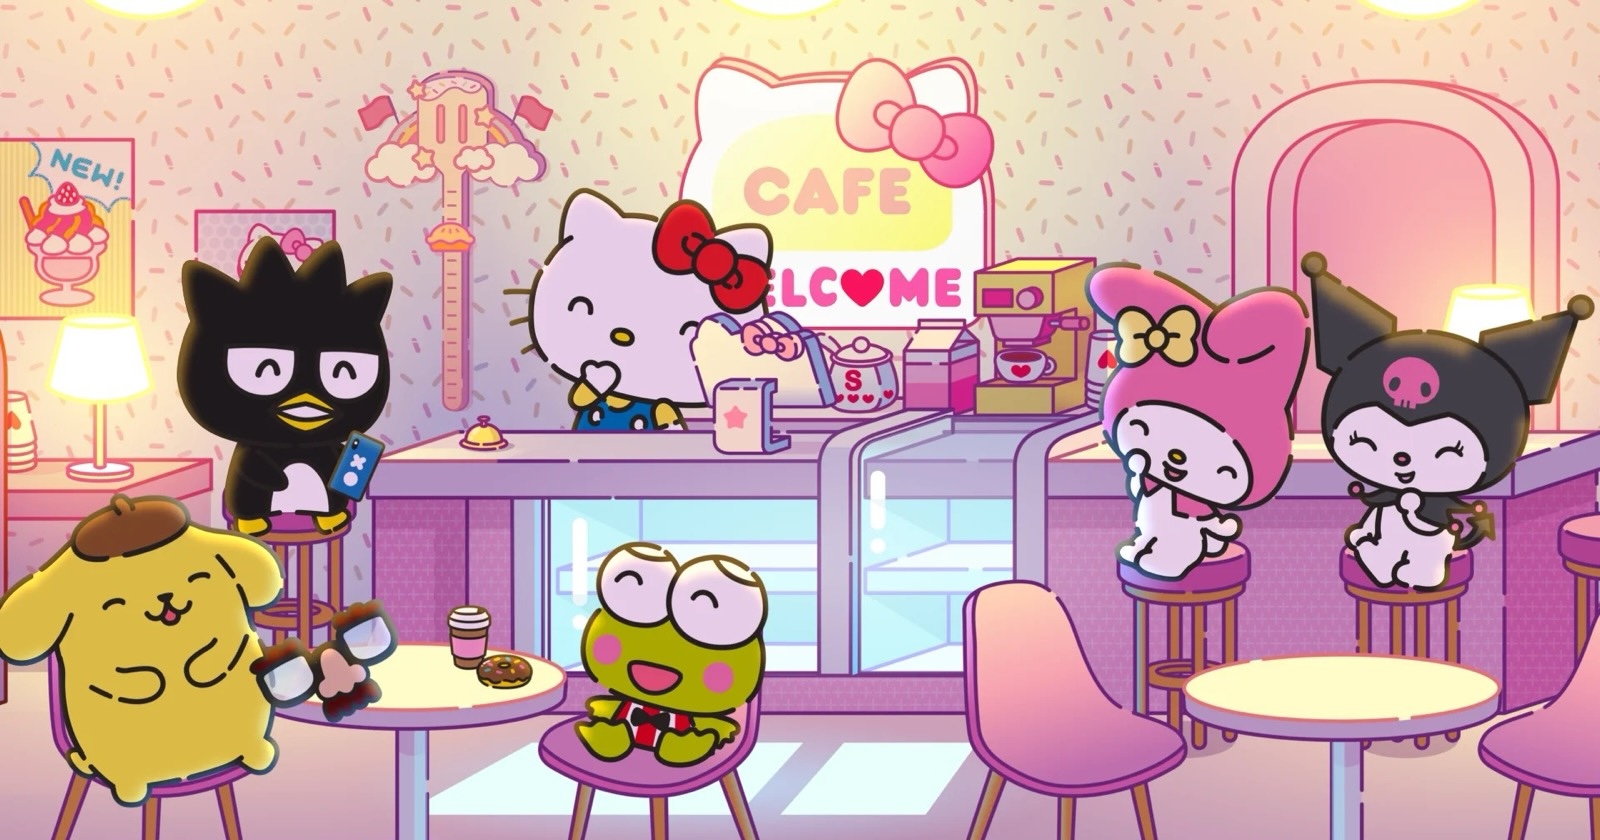 What Sanrio Character Are You? Quiz Hello Kitty cafe